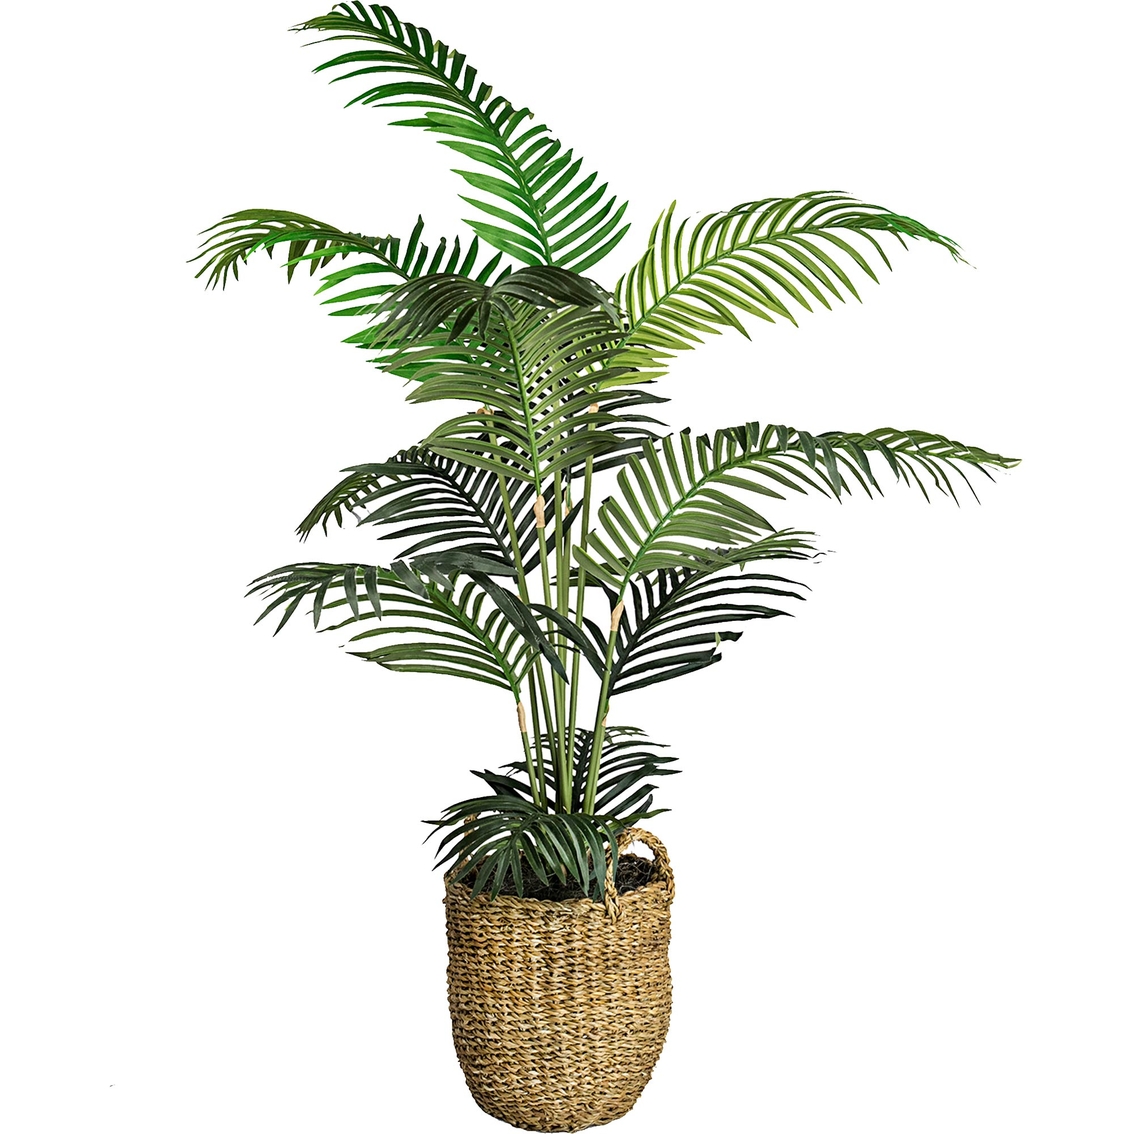 LCG Florals Areca Palm Tree in Basket